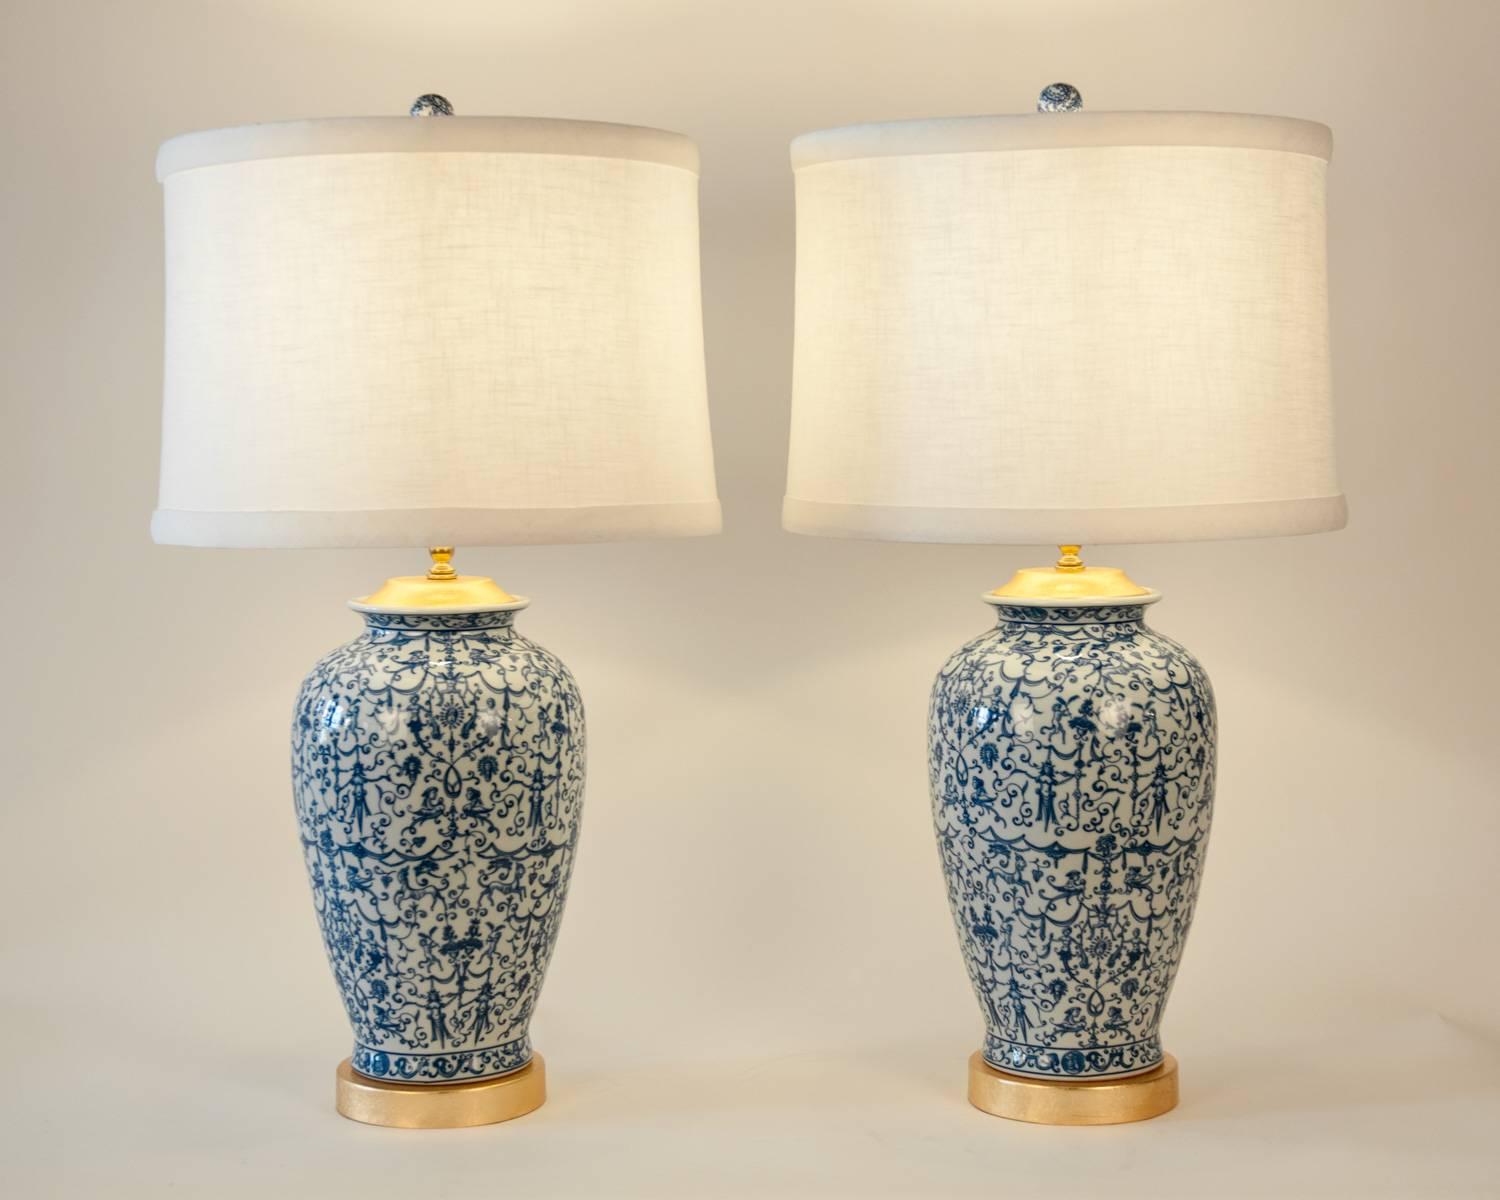 A pair of porcelain table or task lamps with gold-plated top and wooden gold-plated base. Excellent working condition. Each lamp measure about 32 inches high and 10 inches body diameter. Each lamp comes with a round linen exterior, silk interior